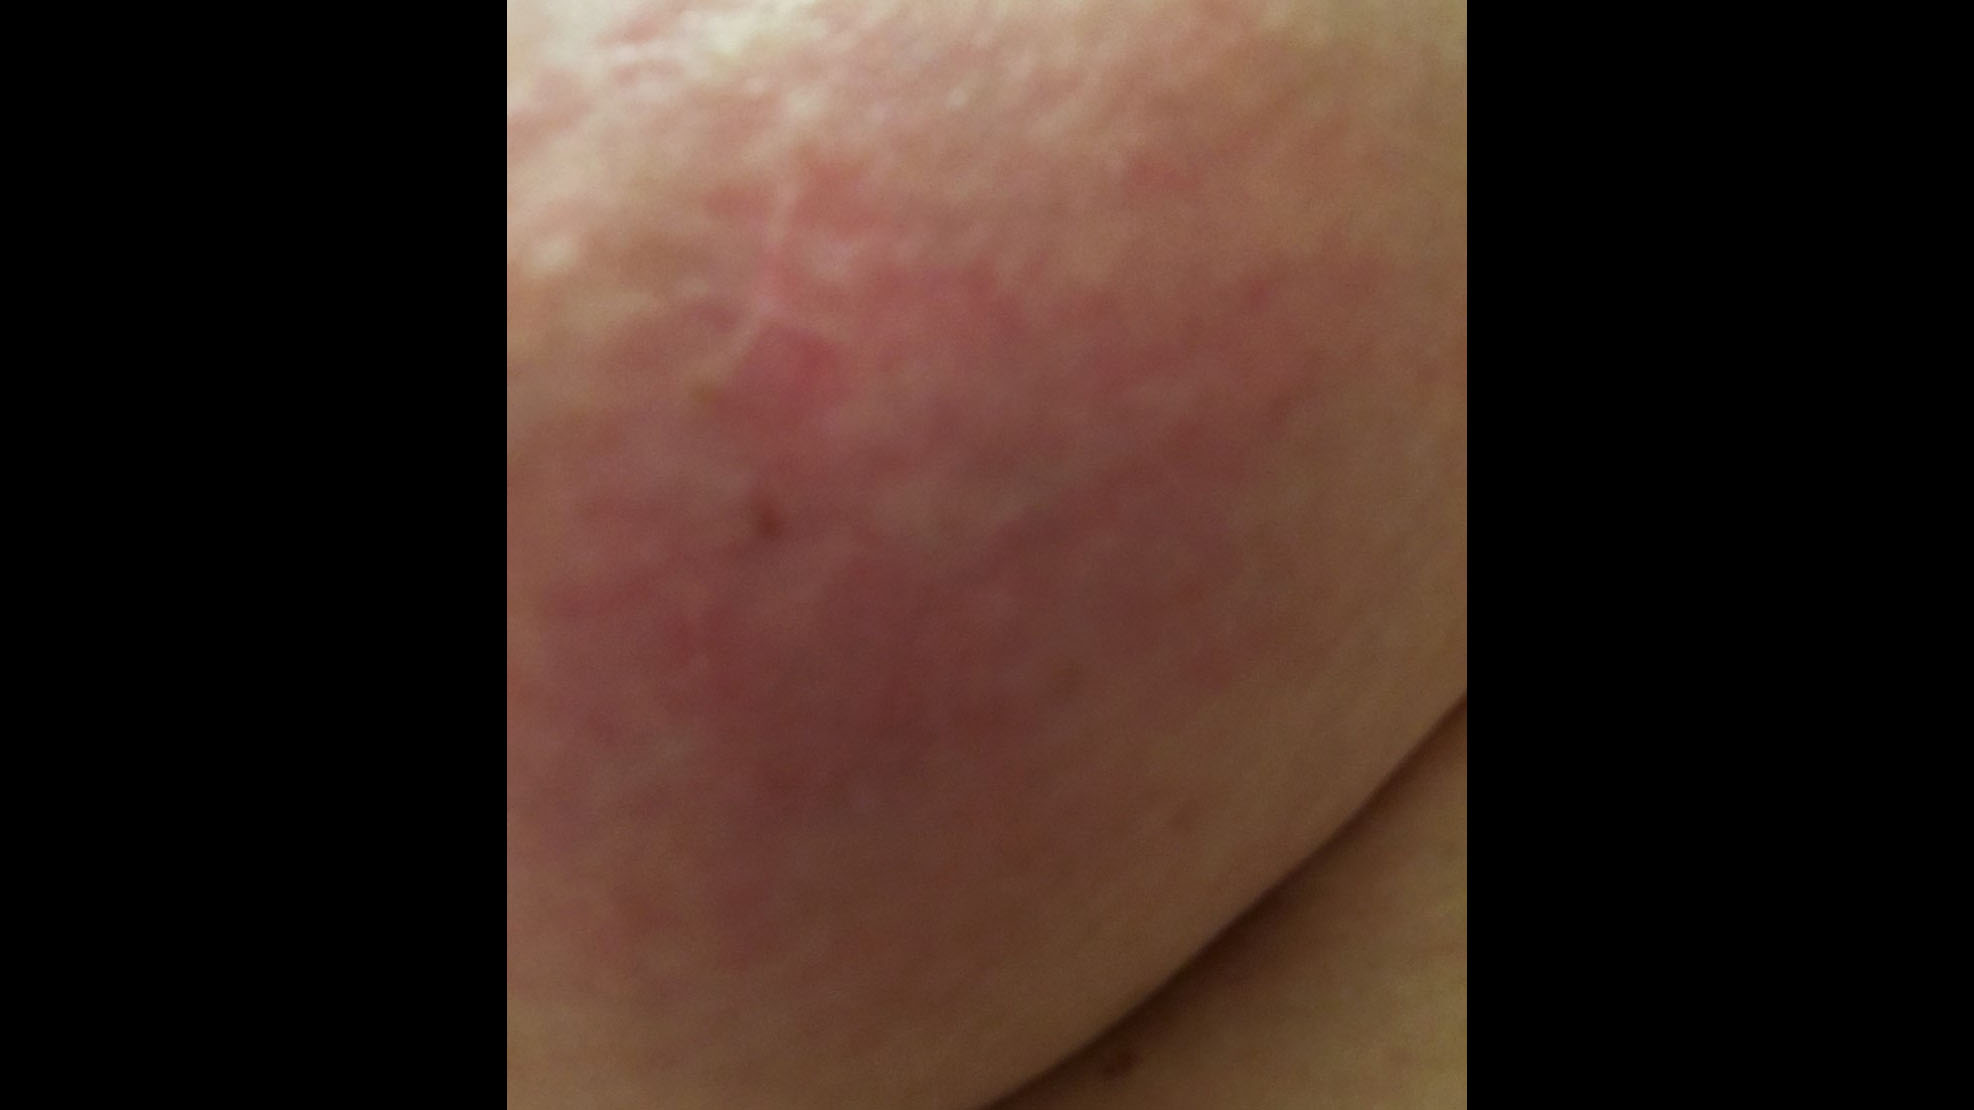 Red circle under breast. Slight burning. Been here for 3 days. :  r/DermatologyQuestions